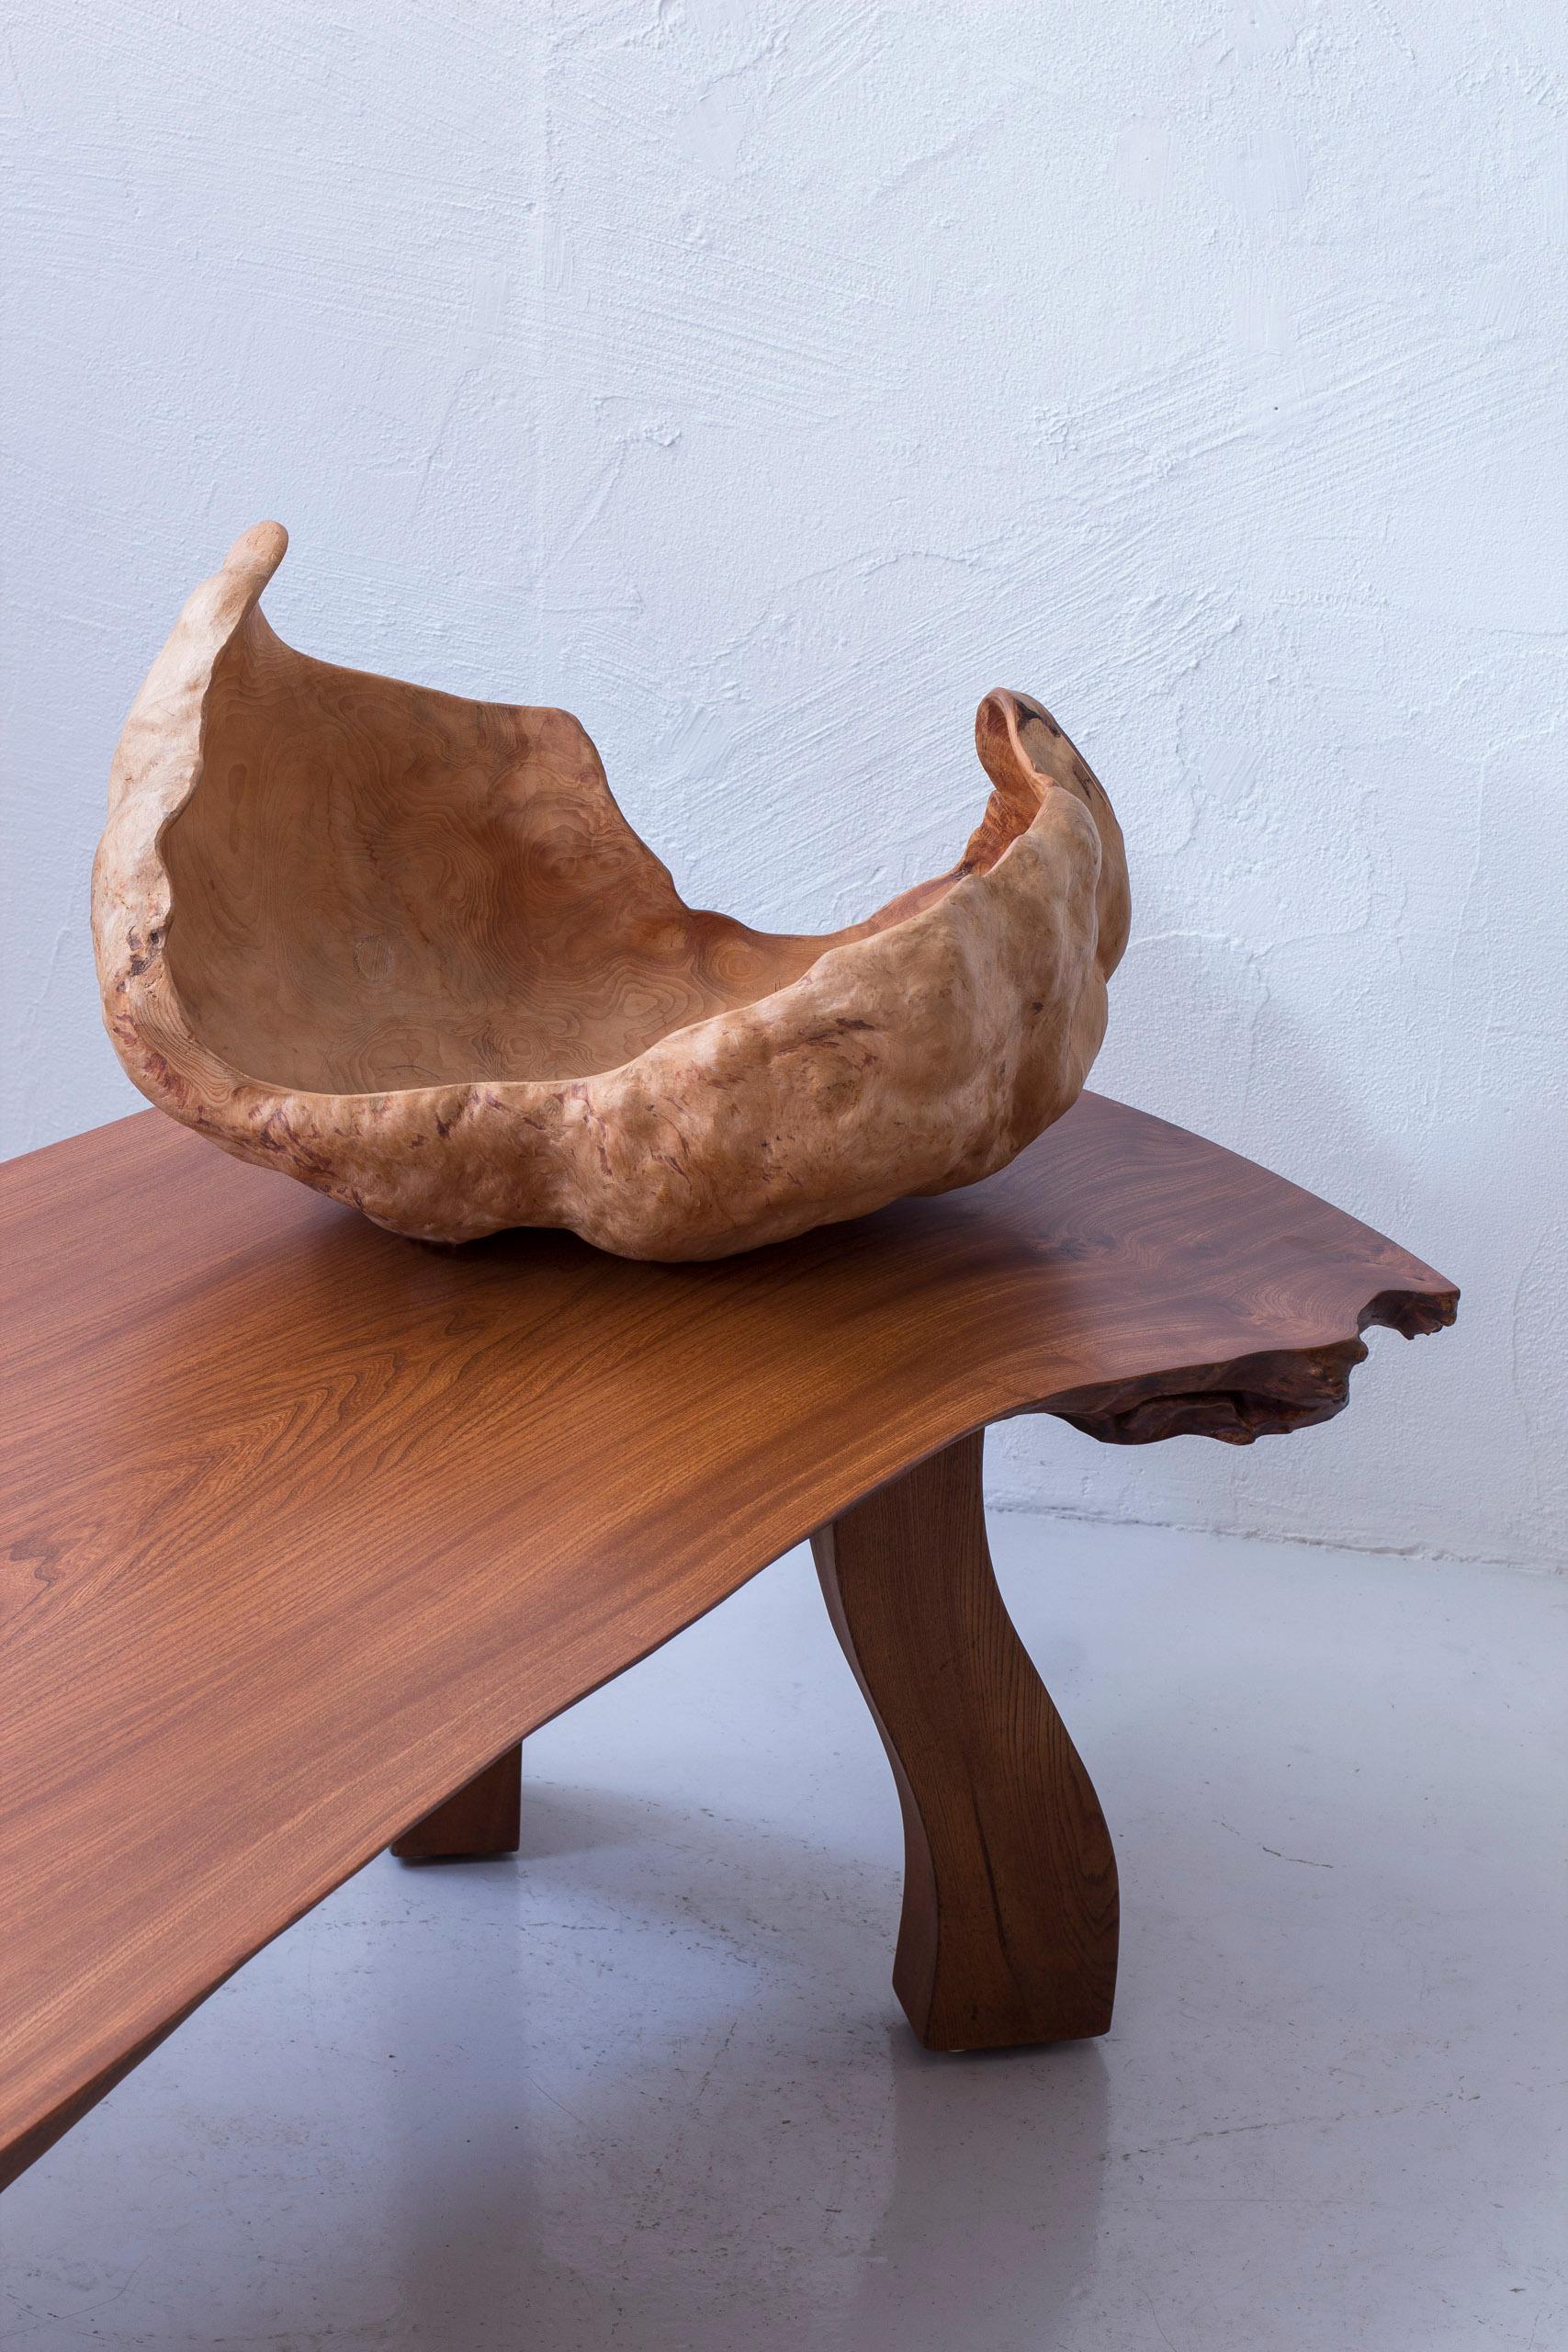 Large  and decorative Swedish made burl knot wood bowl. Hand made by Swedish carpenter during the 20th century. Unusually large size. Good vintage condition with signs of wear and patina.

 

Designer: Unknown

Manufacturer: Unknown

Year: 20th